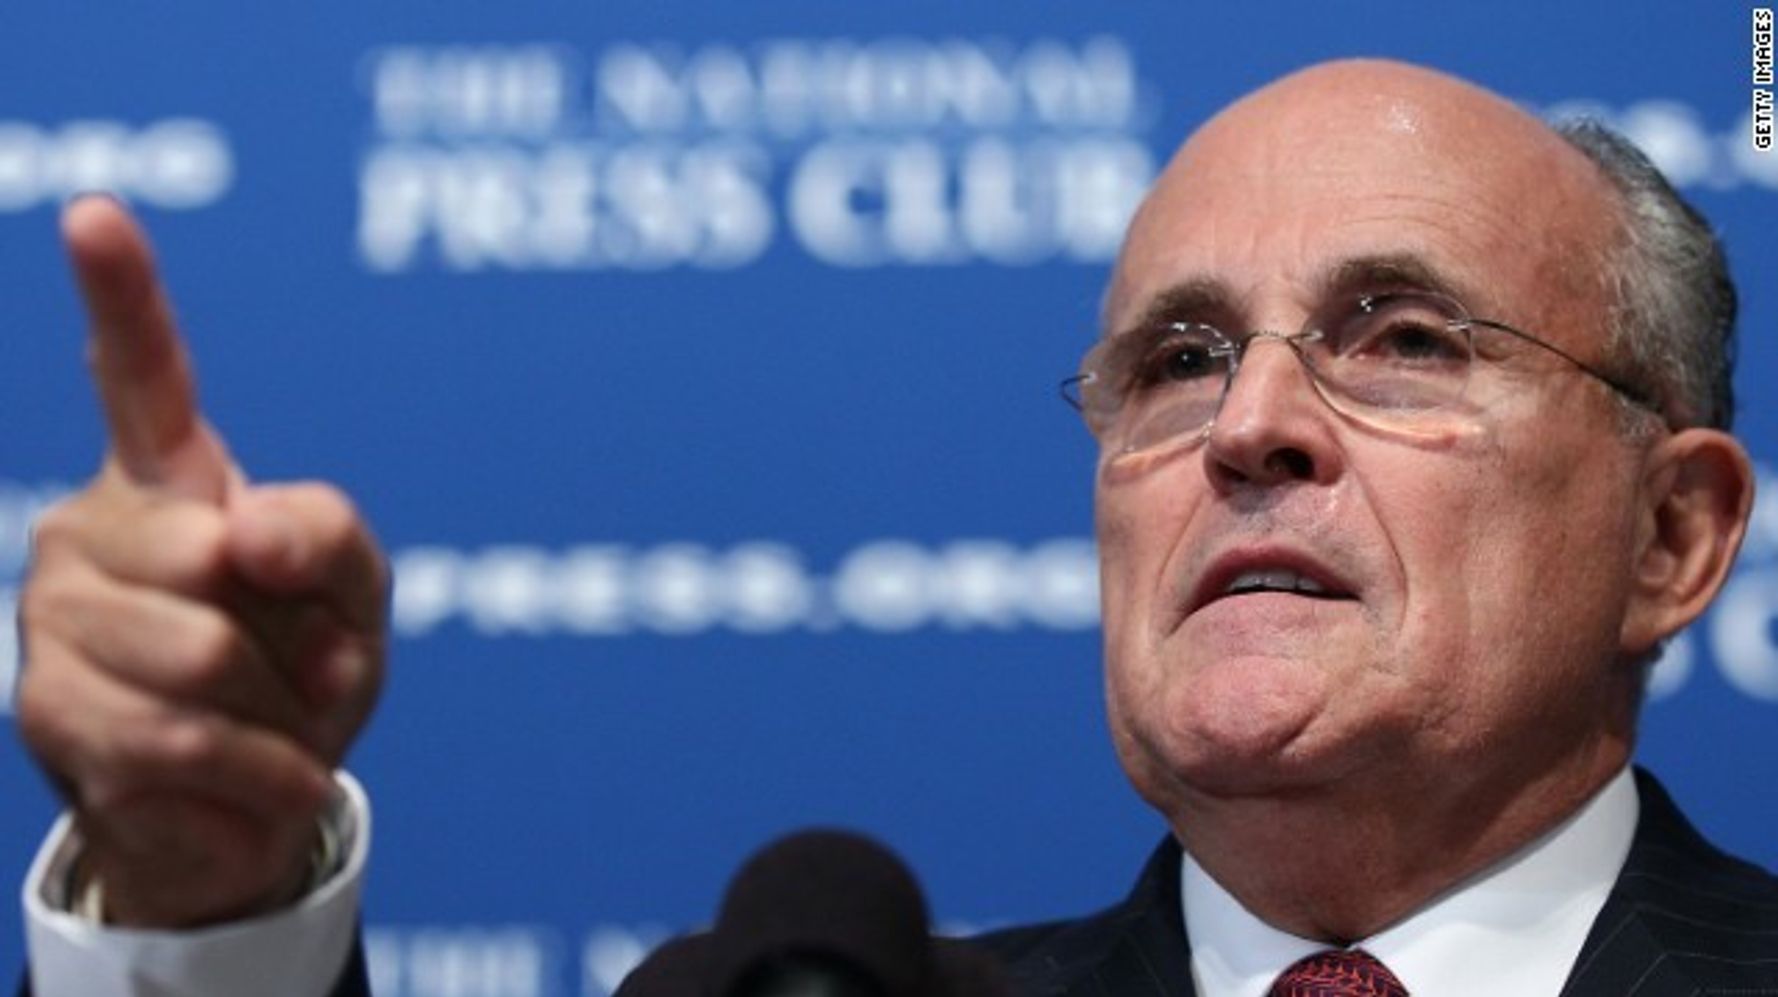 Was Rudy Giuliani At The Center Of An FBI-Trump Campaign Conspiracy To Steal The